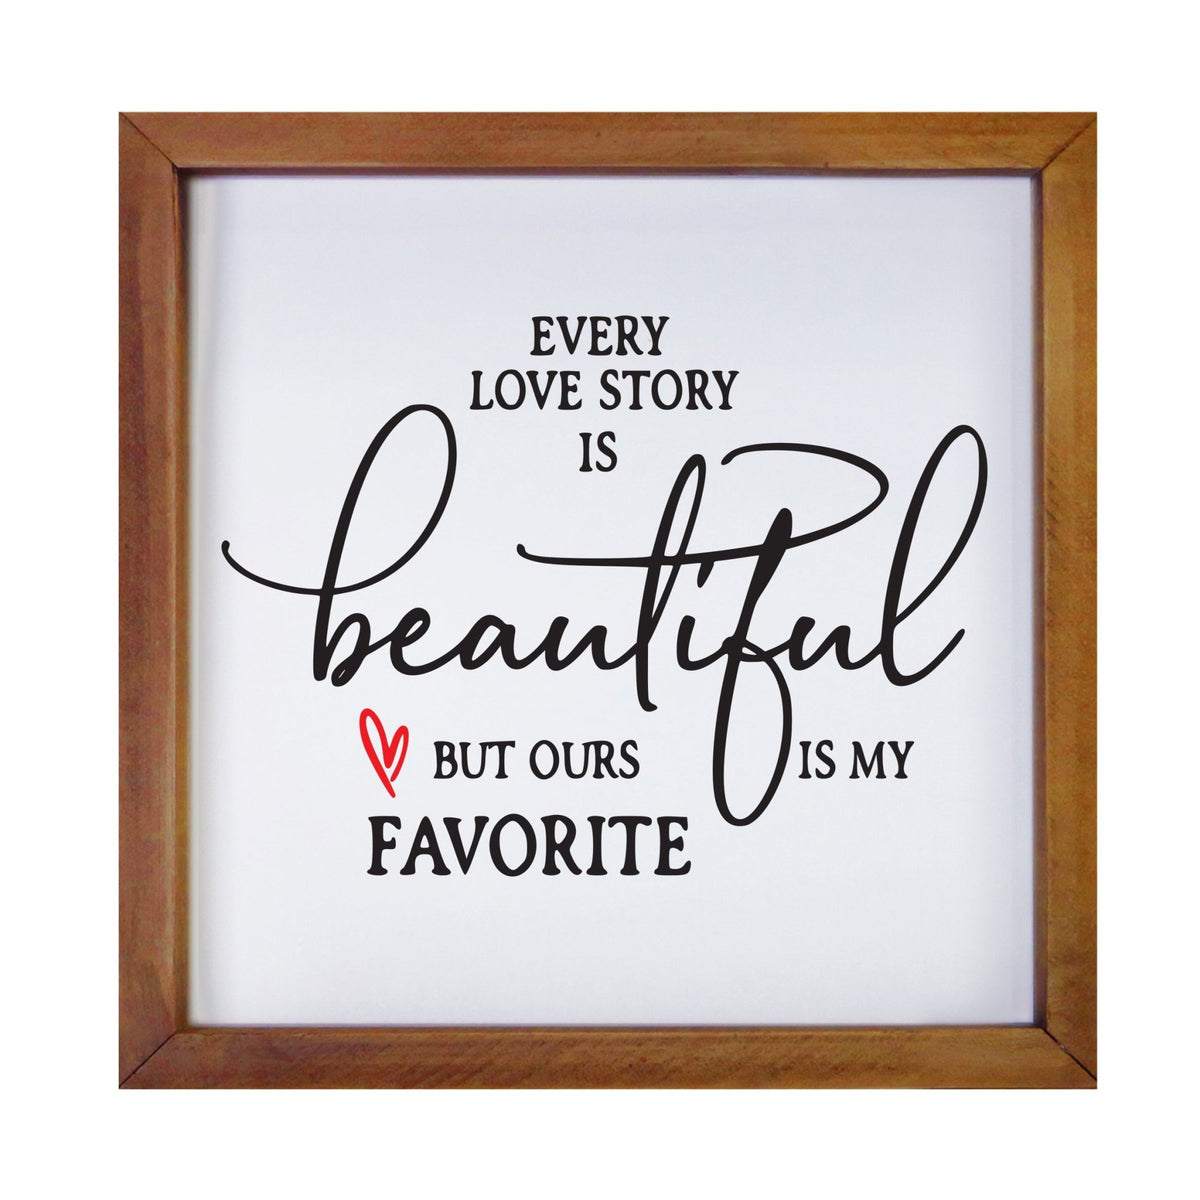 Inspiring Modern Framed Shadow Box 7x7in - Every Love Story Is Beautiful (Heart) - LifeSong Milestones